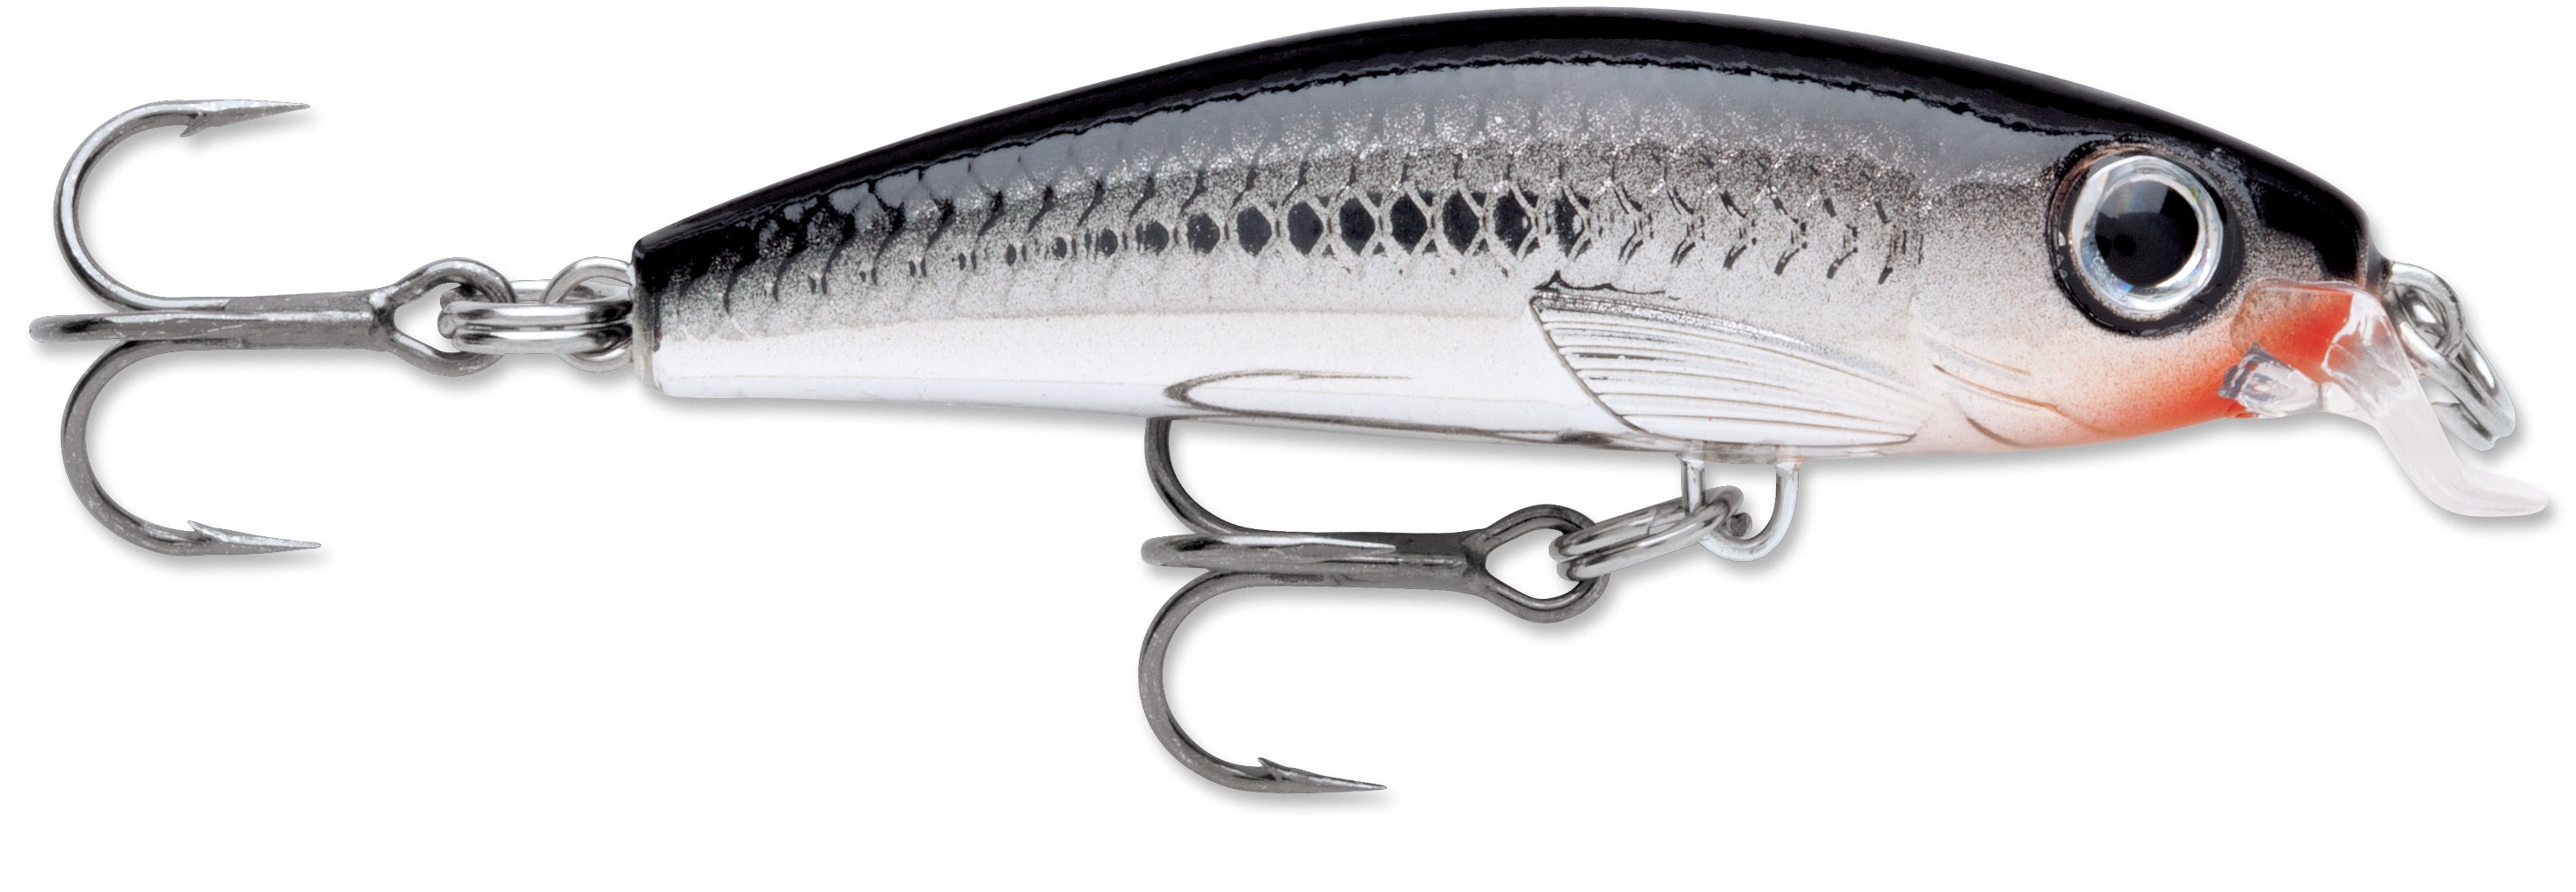 Rapala Ultra Light Minnow Fishing Lures - Material Freshwater Body